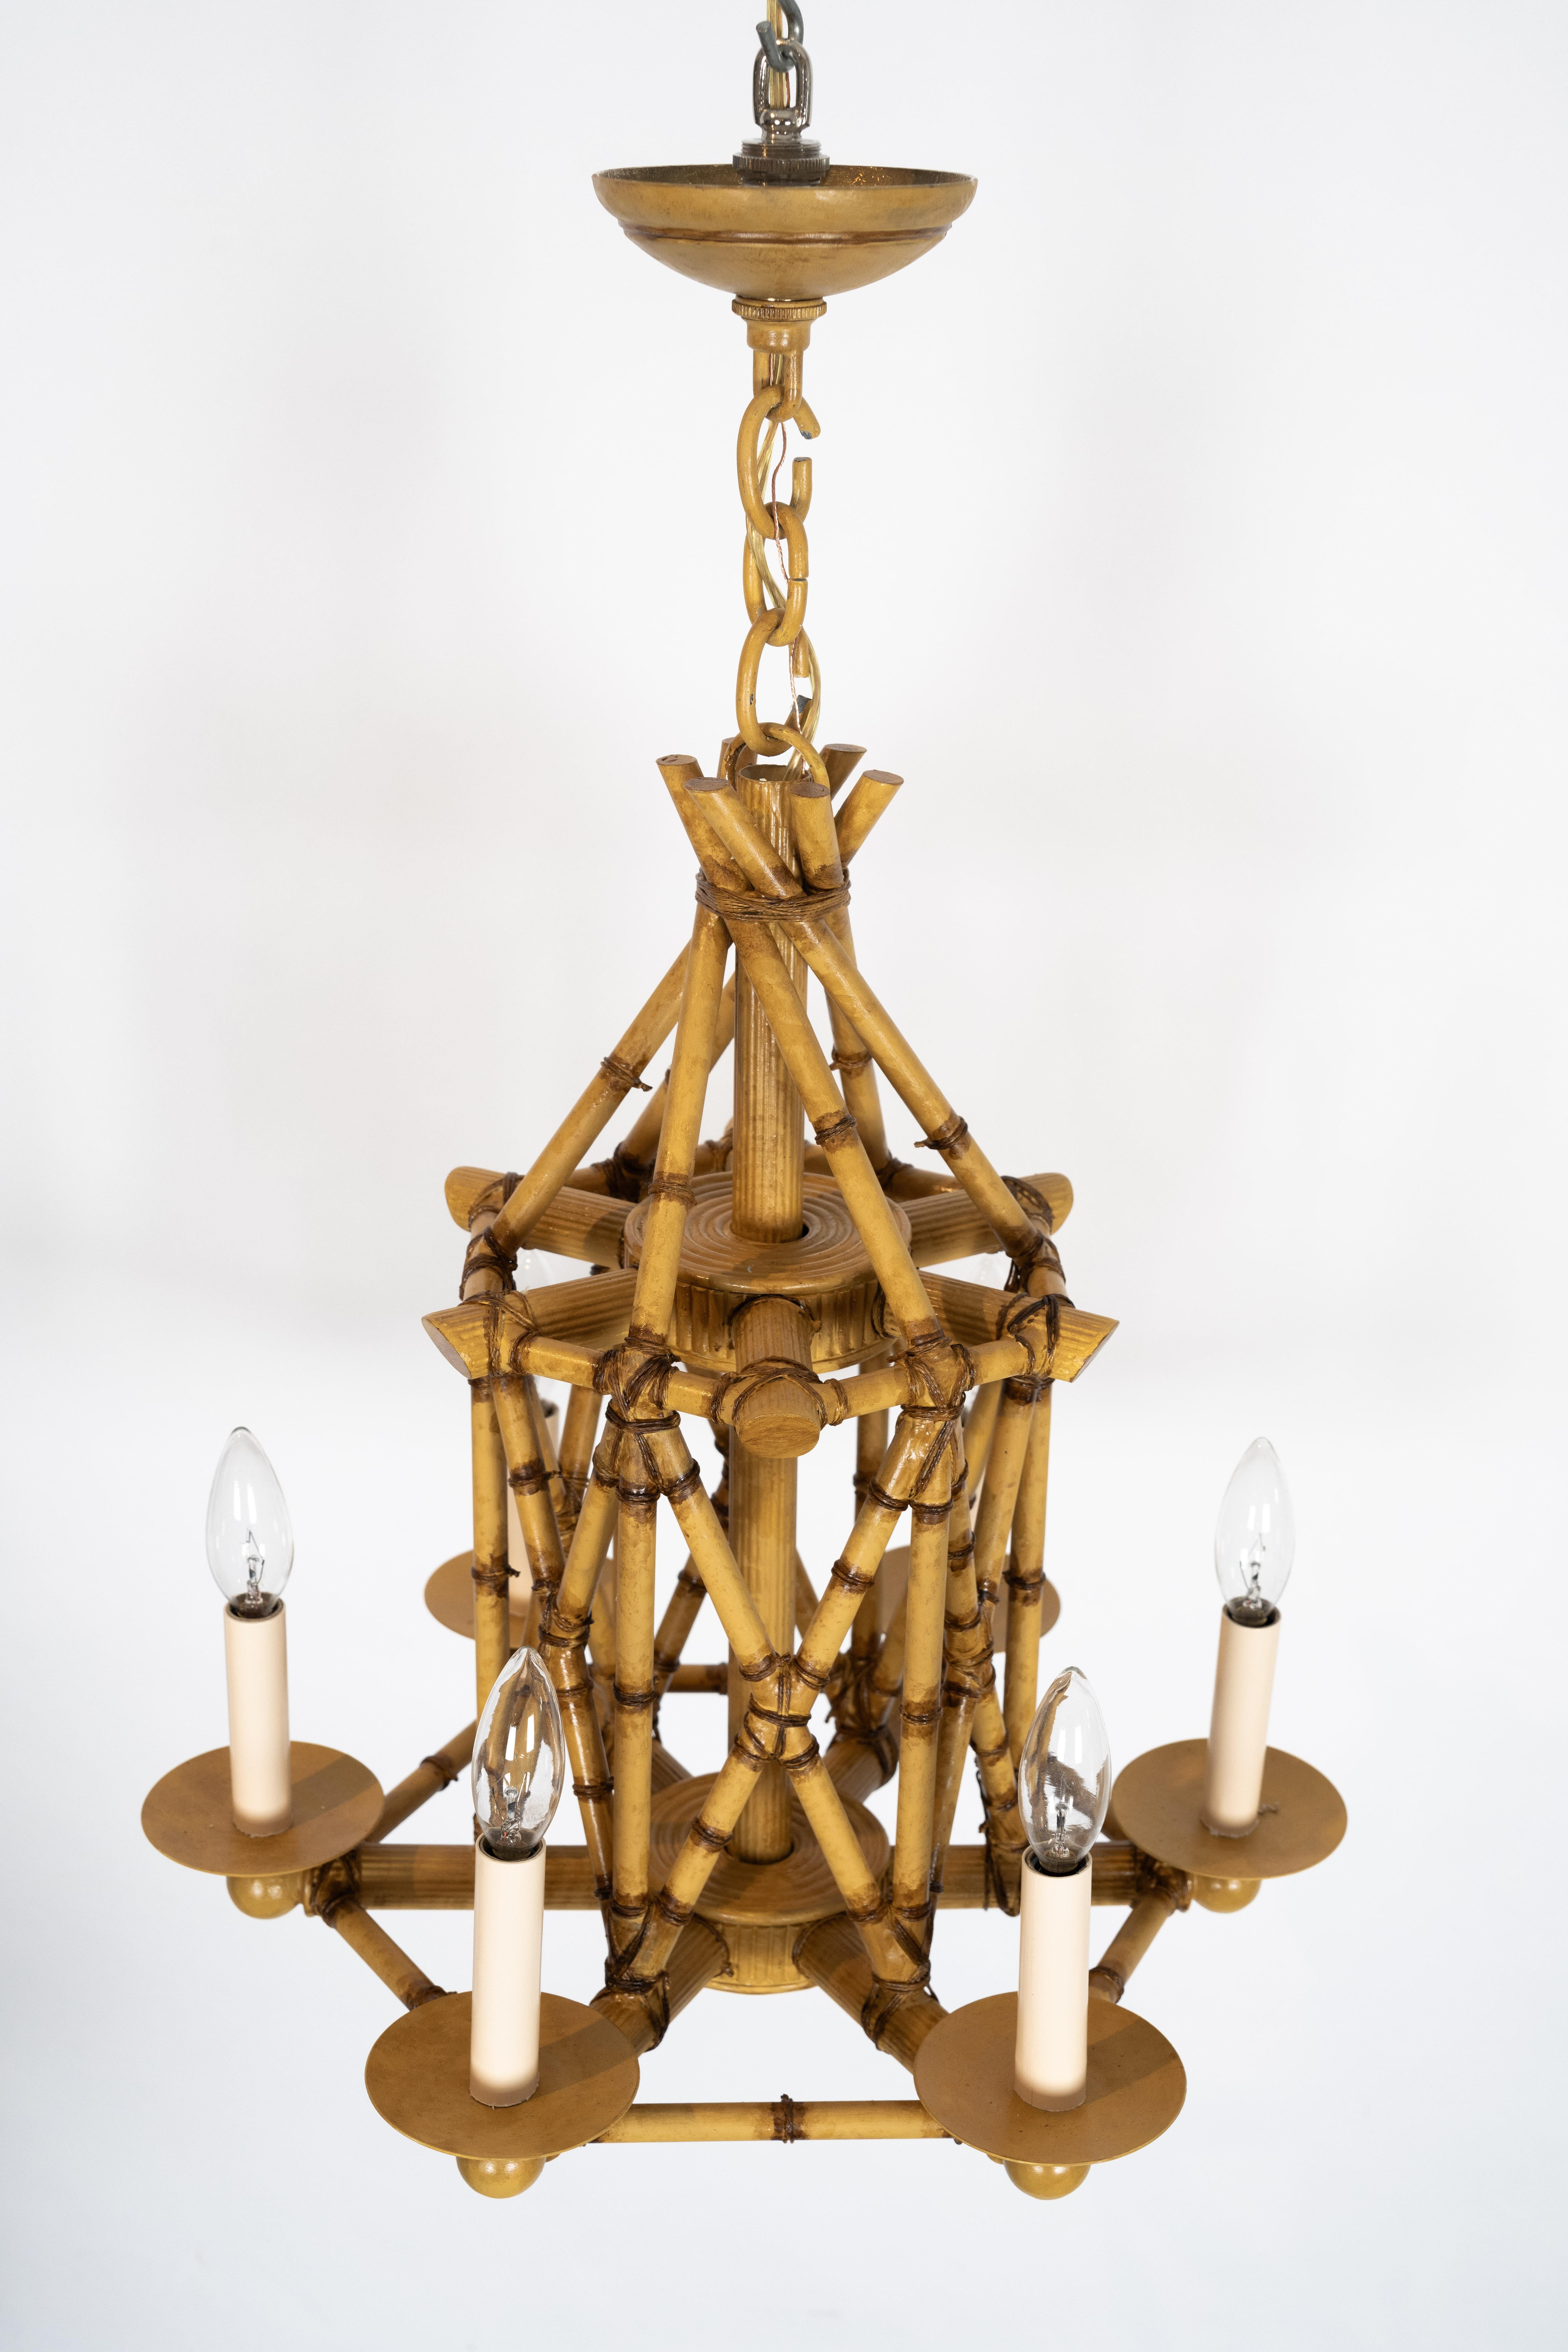 A six-light faux bamboo chandelier. Featuring an intricately constructed cage, formed by cross-banded sections of hand-painted faux bamboo made from brass. With bobeches issuing six candle sleeves.